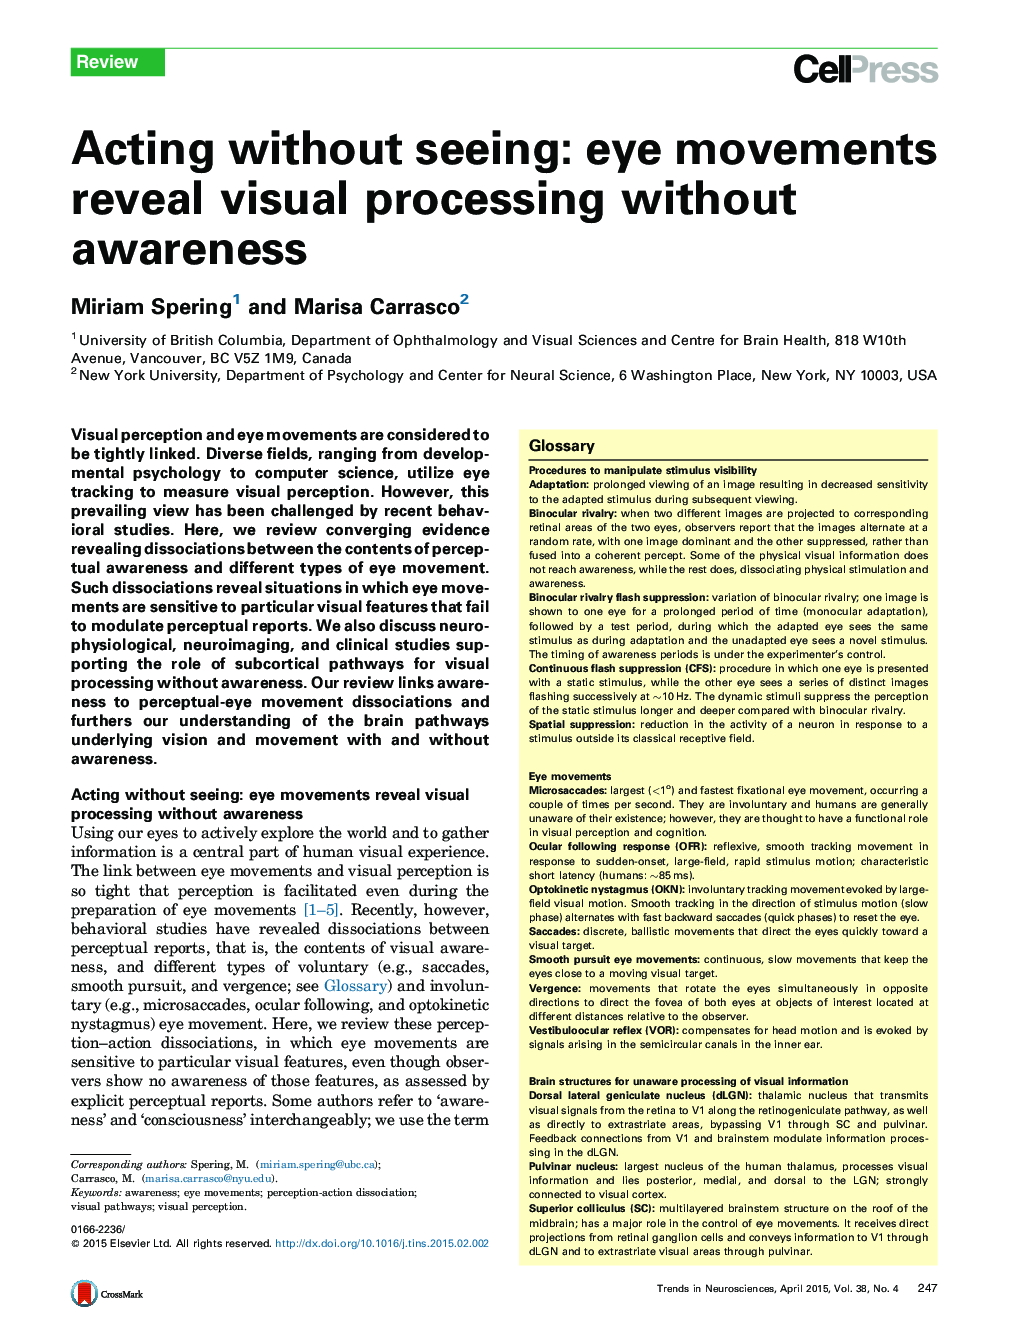 Acting without seeing: eye movements reveal visual processing without awareness